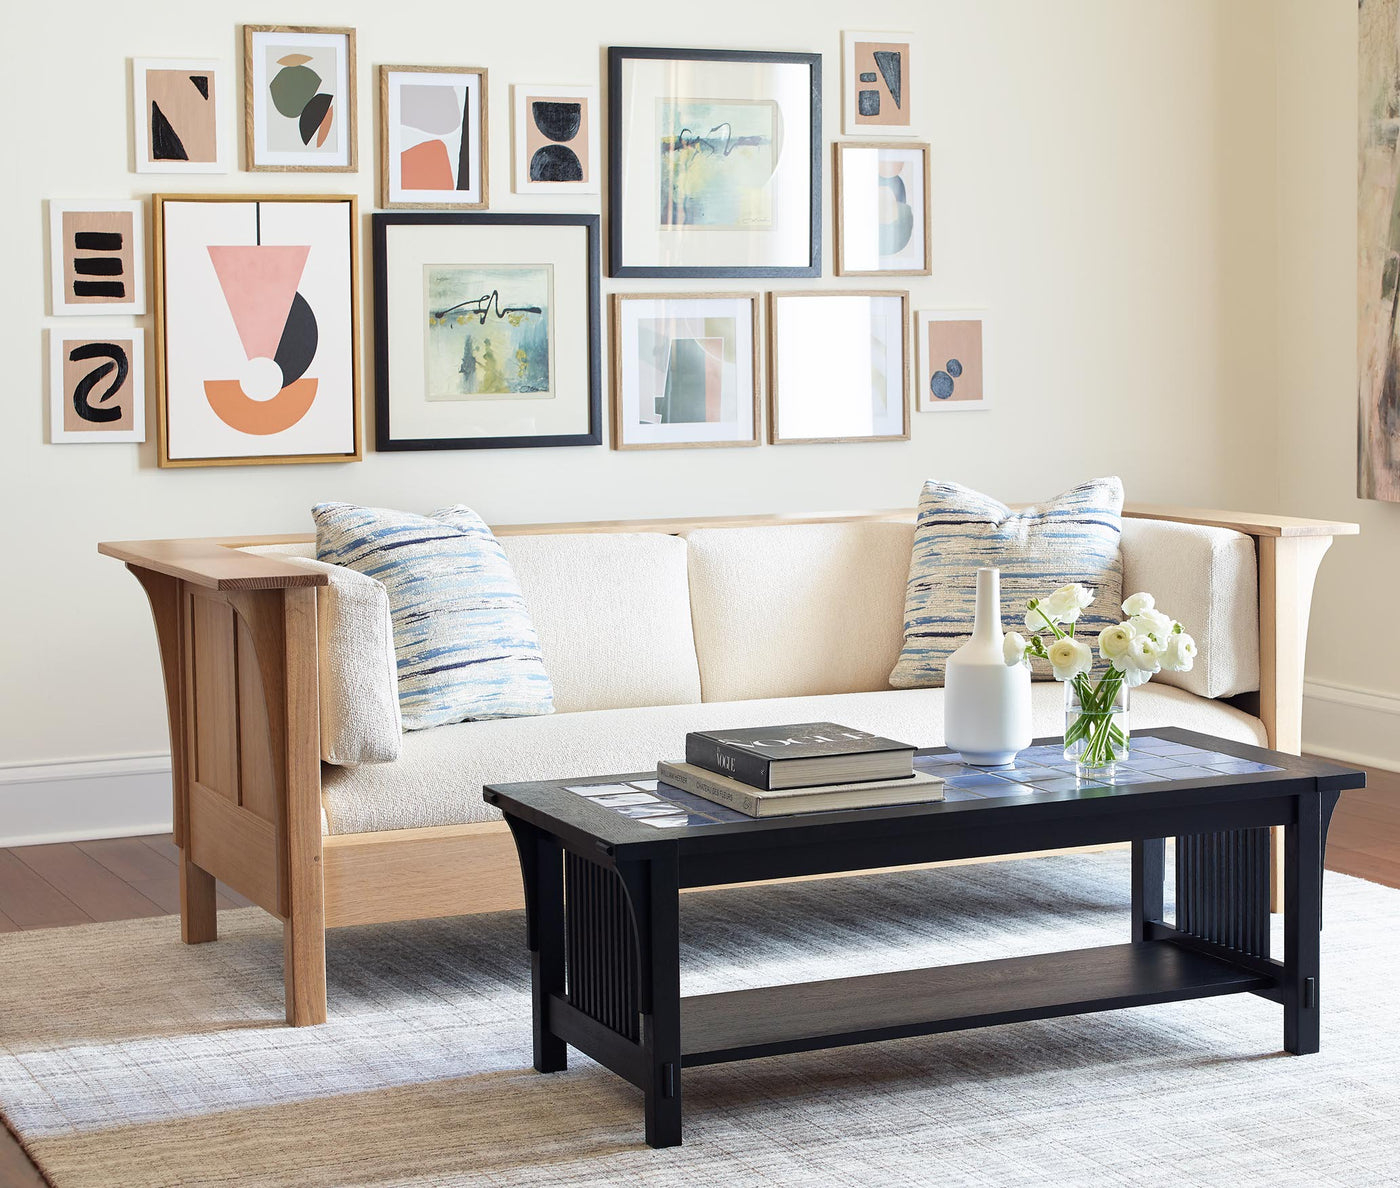 A white fabric Settle sofa and black coffee table sit in front of a wall covered with picture frames of varying sizes with abstract art